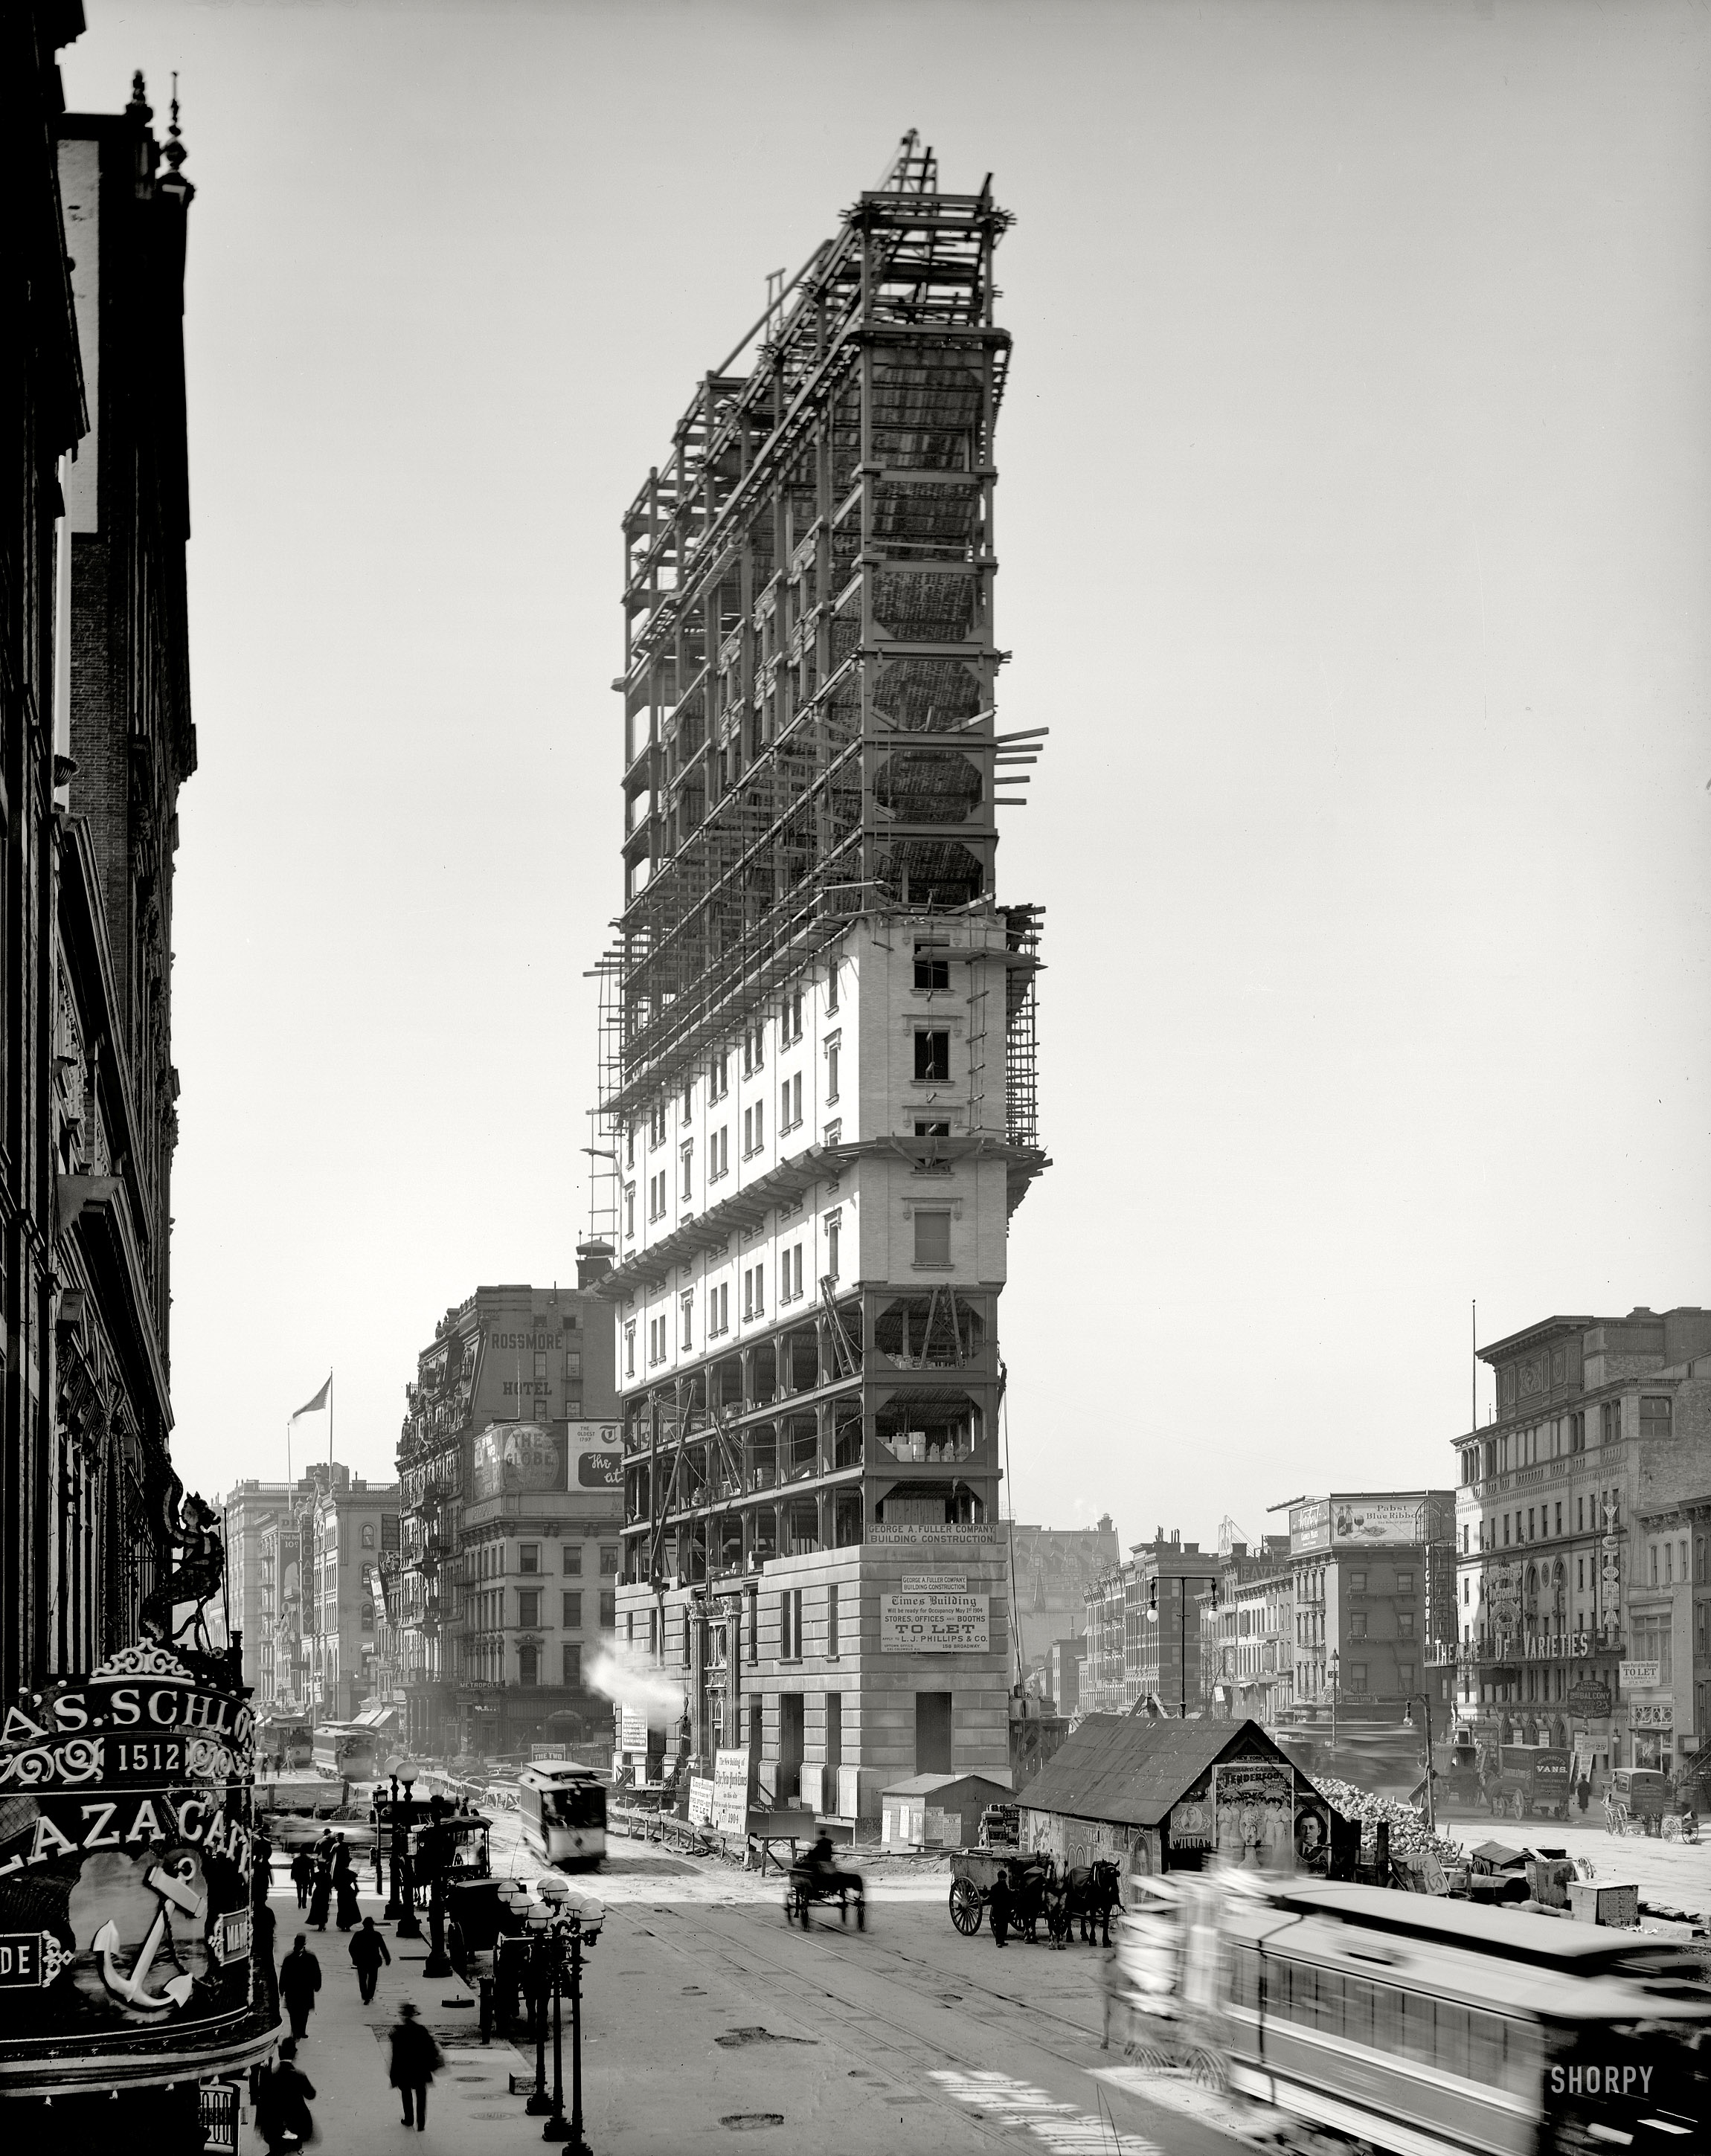 New York circa 1903. "New York Times building under construction." 8x10 inch dry plate glass negative, Detroit Publishing Company. View full size.